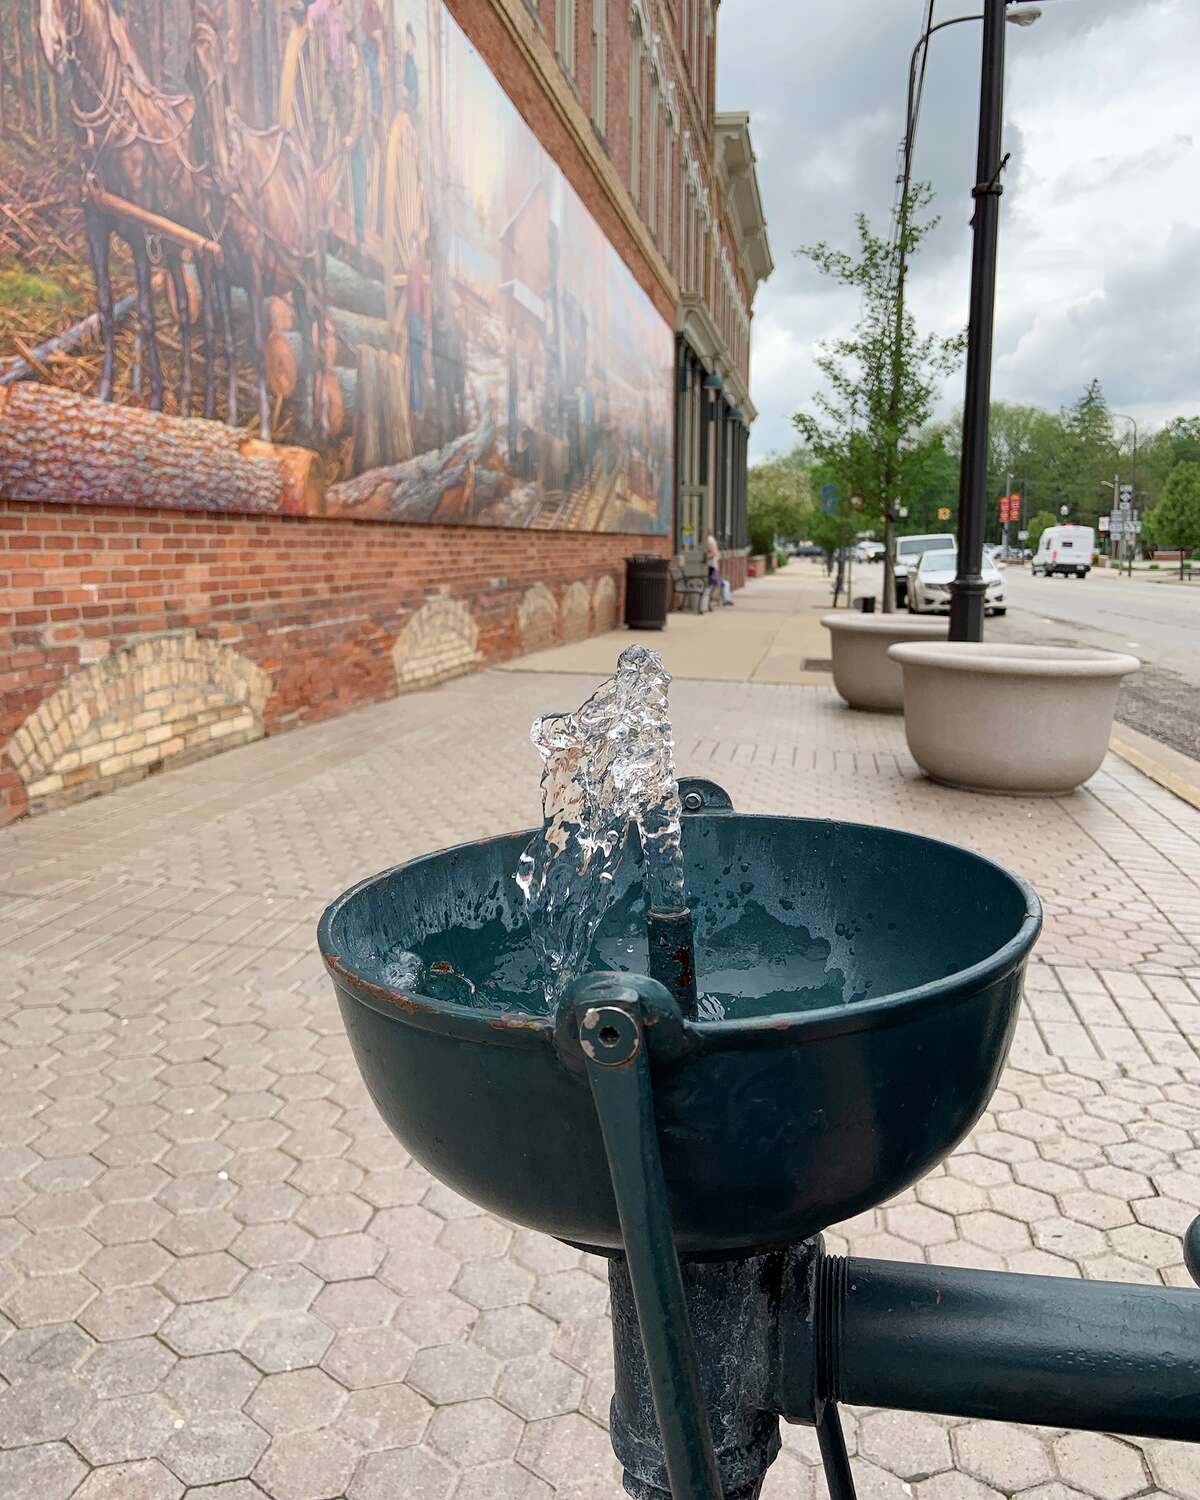 Big Rapids' historic water fountain recently was spotted on the corner of Maple Street and Michigan Avenue. The drinking fountain dates back to the late 1880s. 